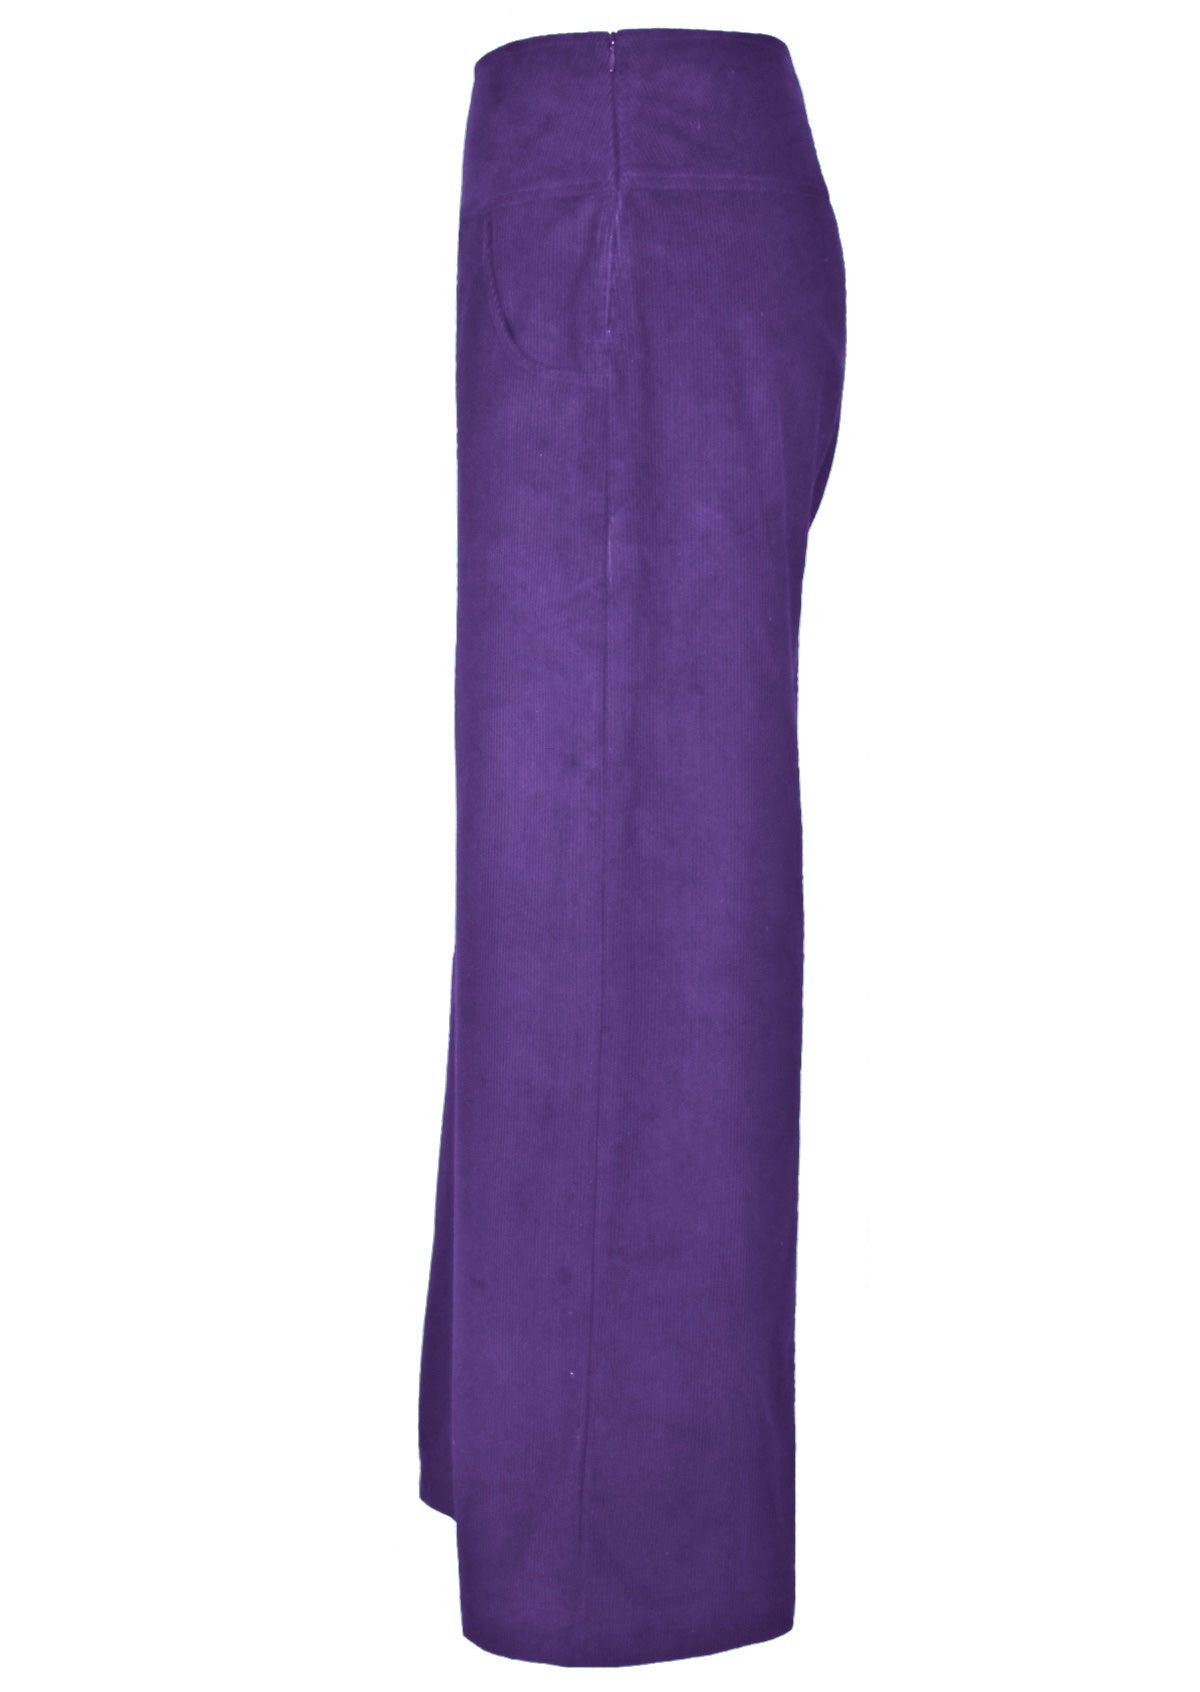 100% cotton corduroy pants in purple have side pockets. 